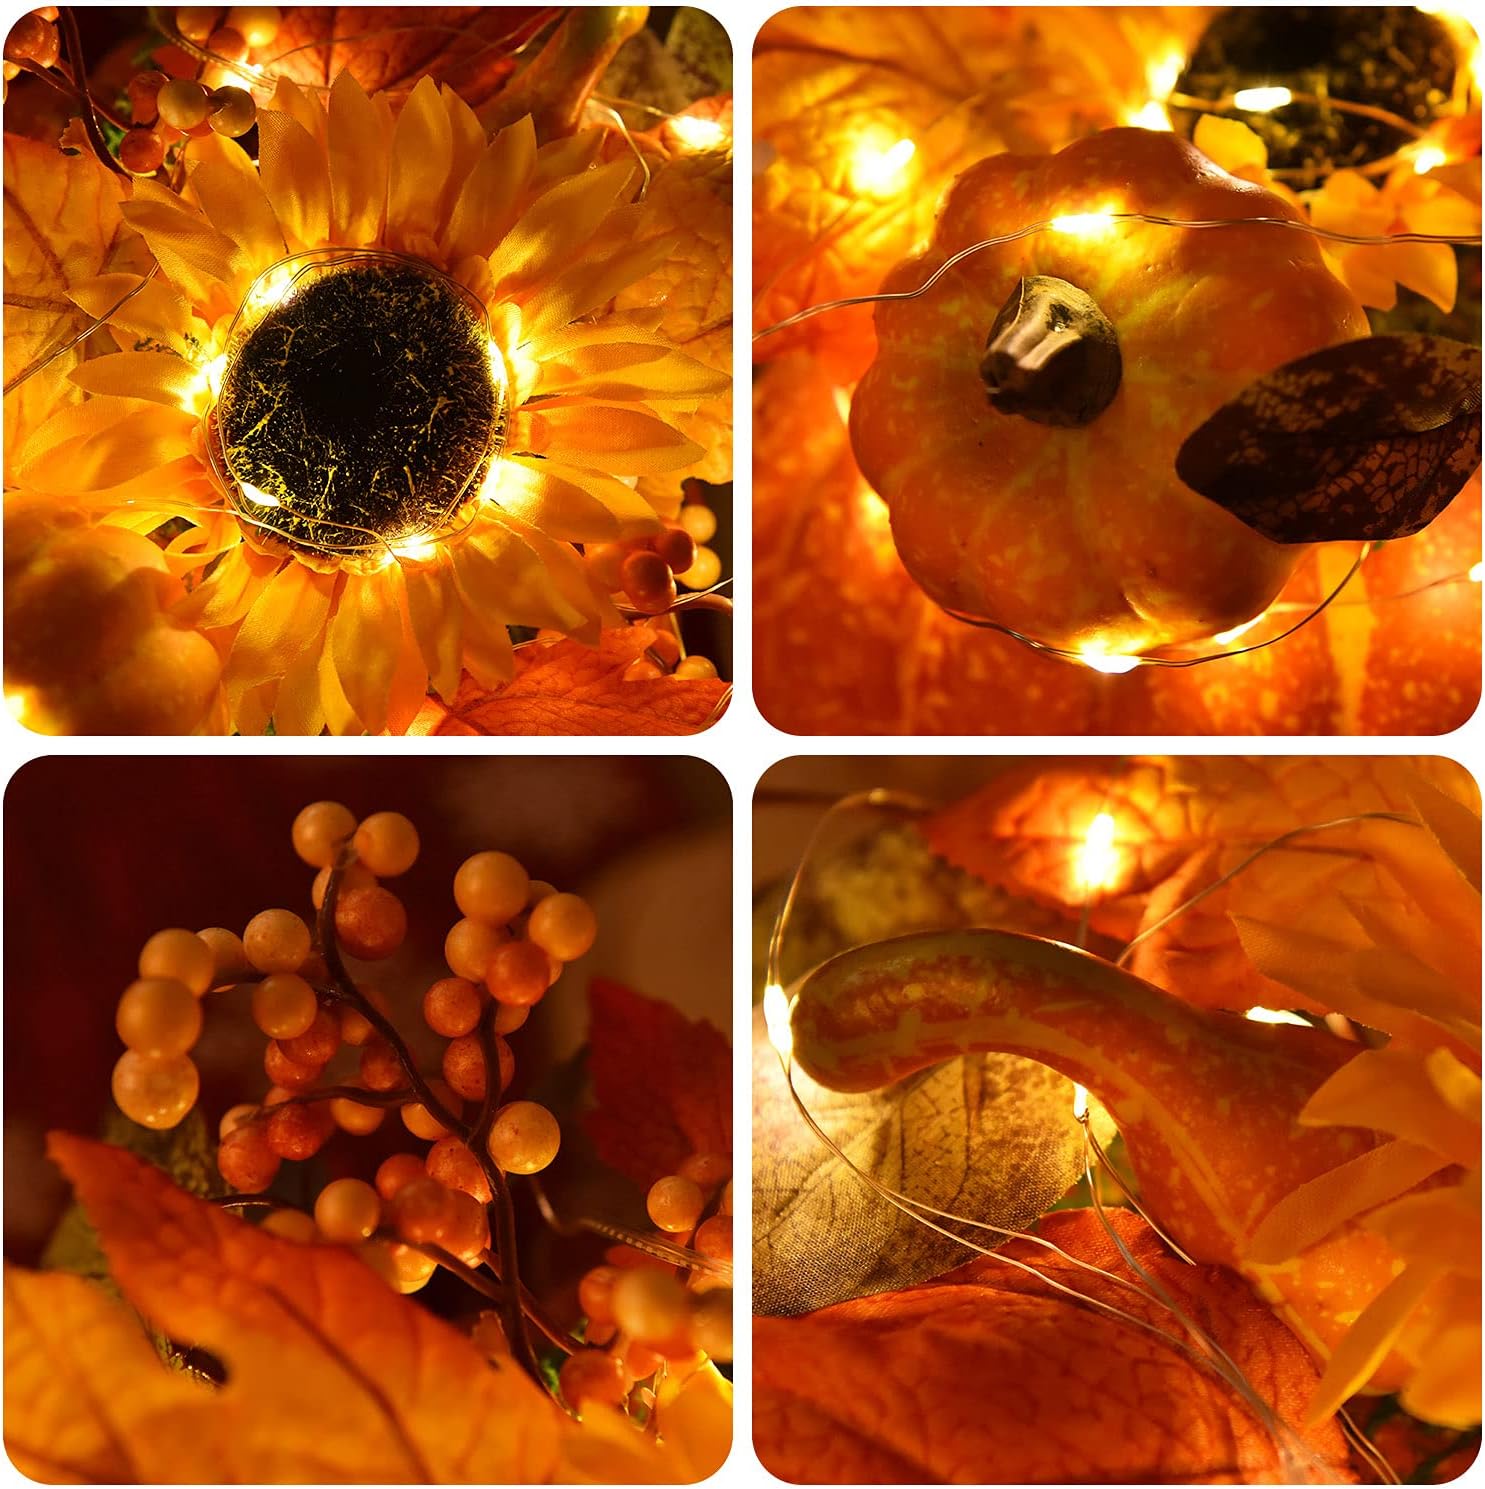 Lvydec Large Pumpkin Fall Table Decoration, Artificial Pumpkin with Maple Leaves Sunflower Berries and LED Lights for Fall Table Centerpieces Thanksgiving Decor